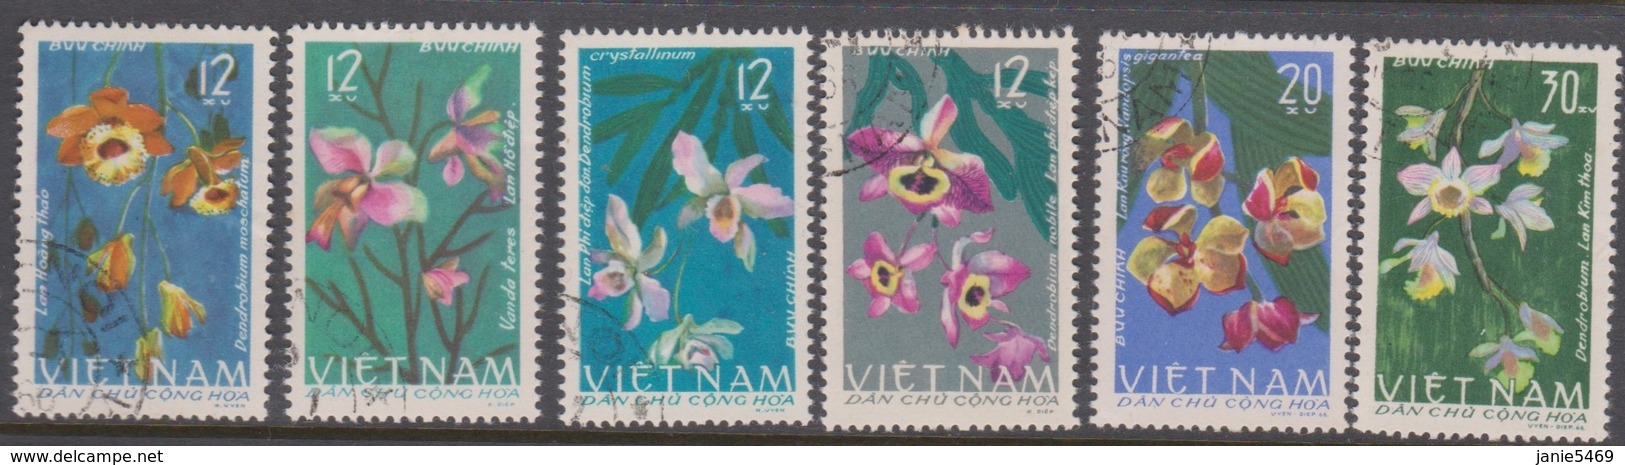 Vietnam 422-27 1966 Orchids, Used - Orchids